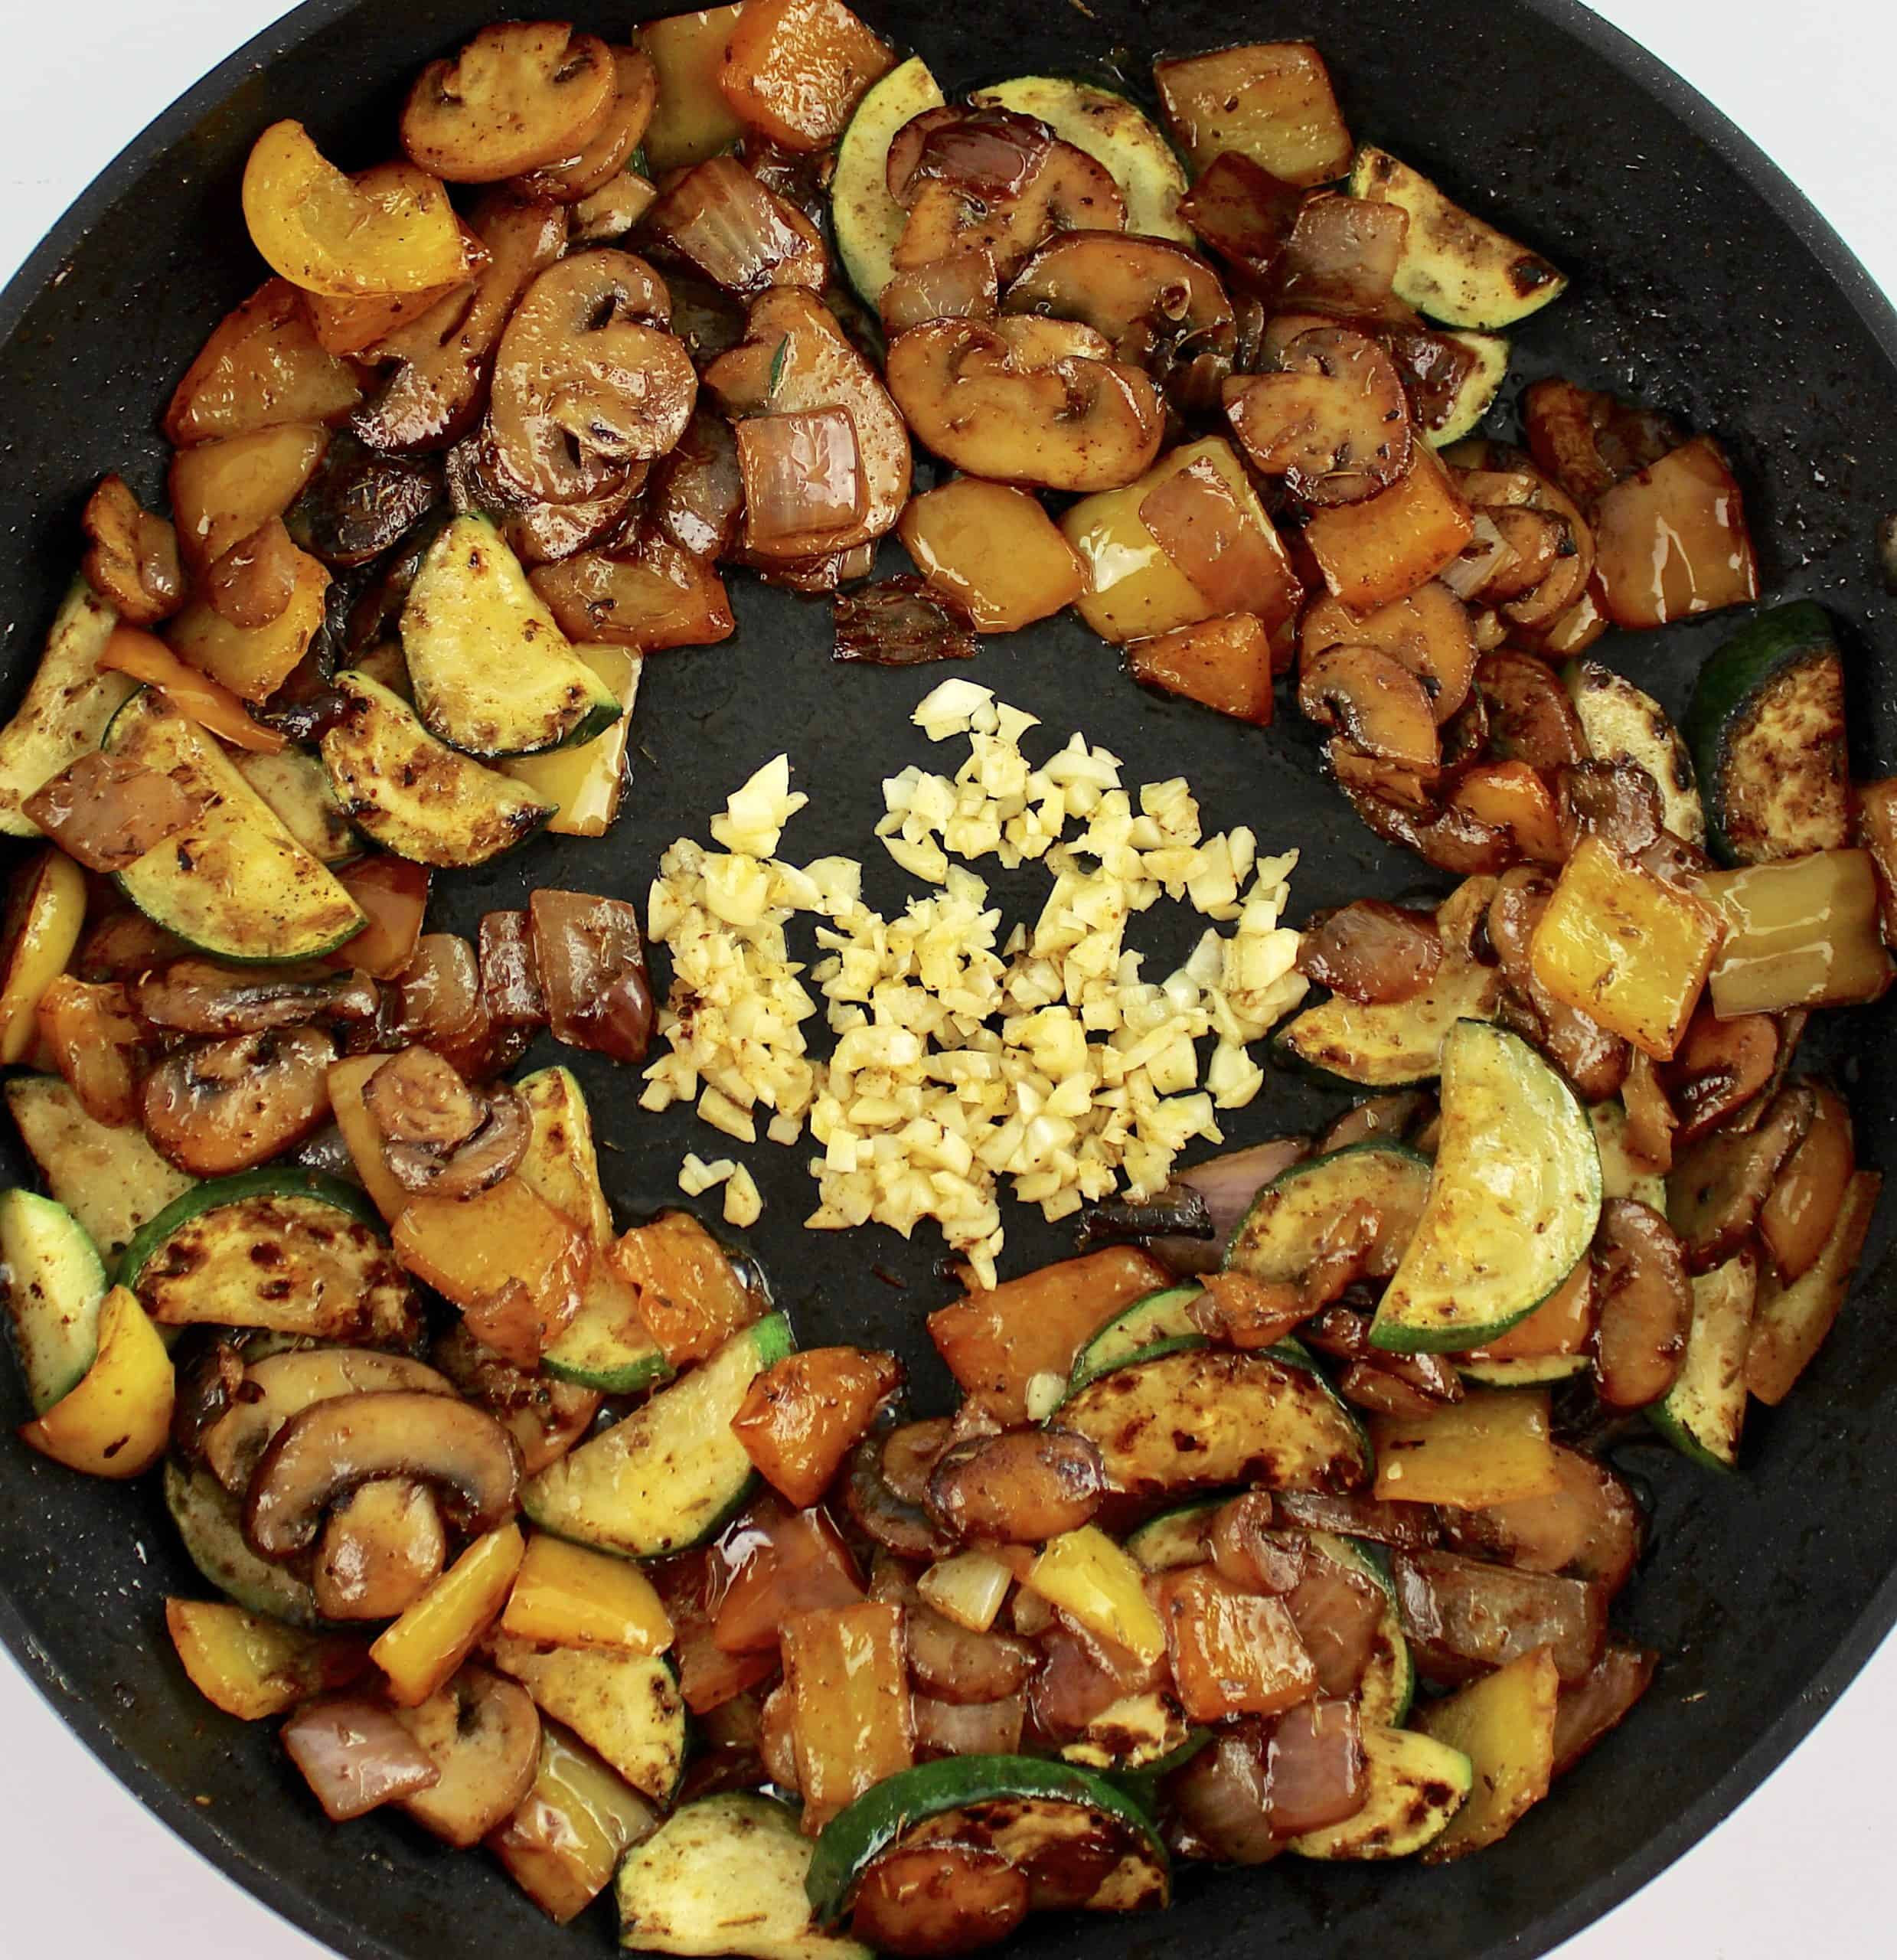 Sautéed veggies in skillet with minced garlic in the center